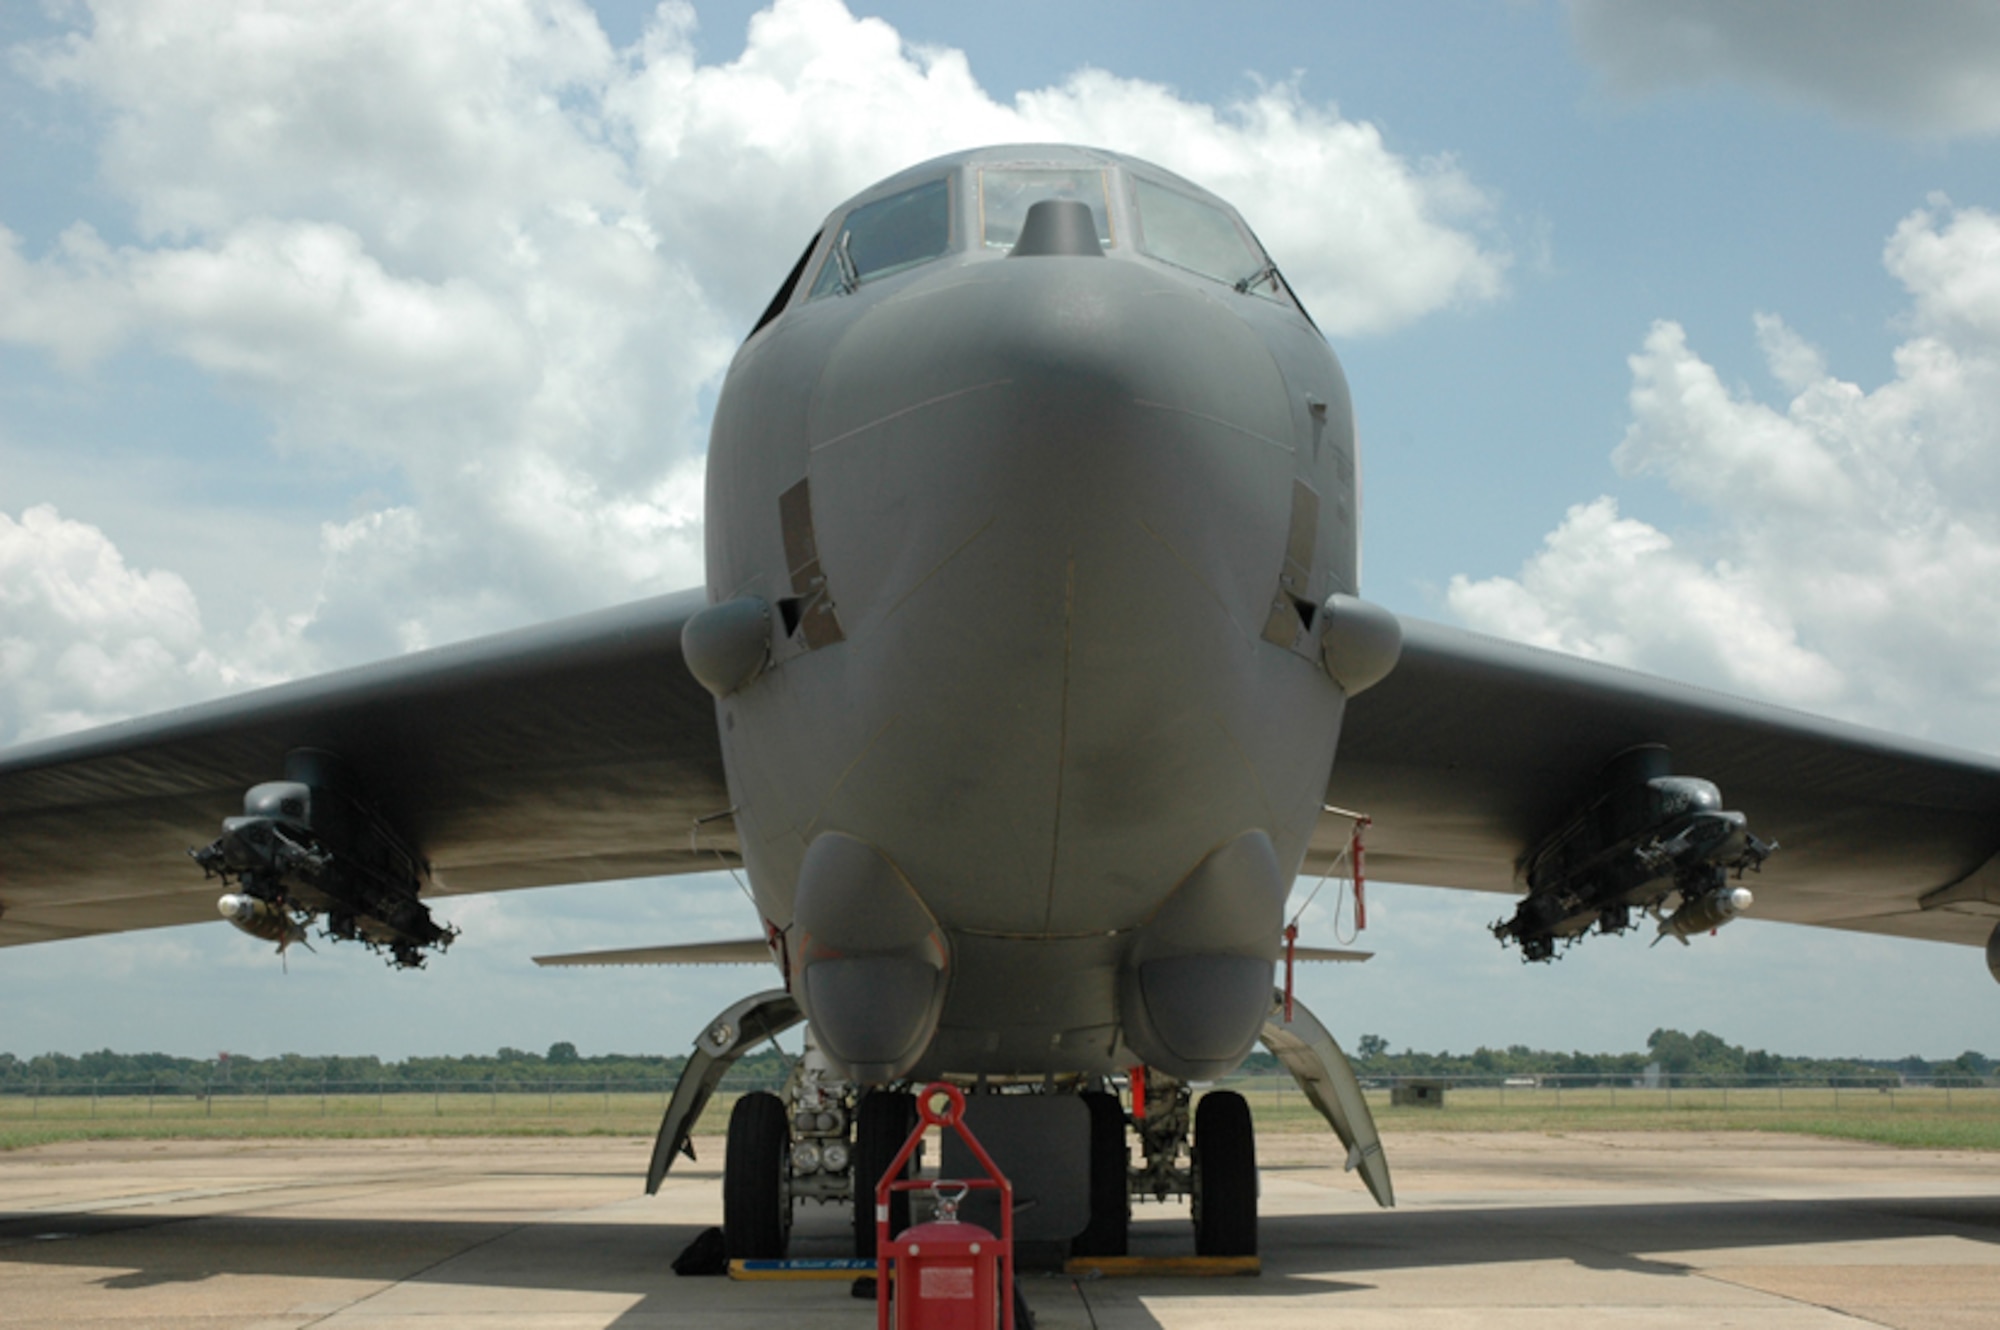 A  B-52 Stratofortress  from the 49th Test and Evaluation Squadron loaded with two Laser Joint Direct Attack Munitions awaits its mission at Barksdale Air Force Base, La., July 10.  The 49th TES demonstrated the B-52's  LJDAM capablity on a target on the after a cross country flight.  The target was stationary, but the 49th plans to demonstrate the LJDAM on a moving target soon.  The laser piece of the munition allows for updated targeting and adjustments to moving targets.  Photo by Boeing.  